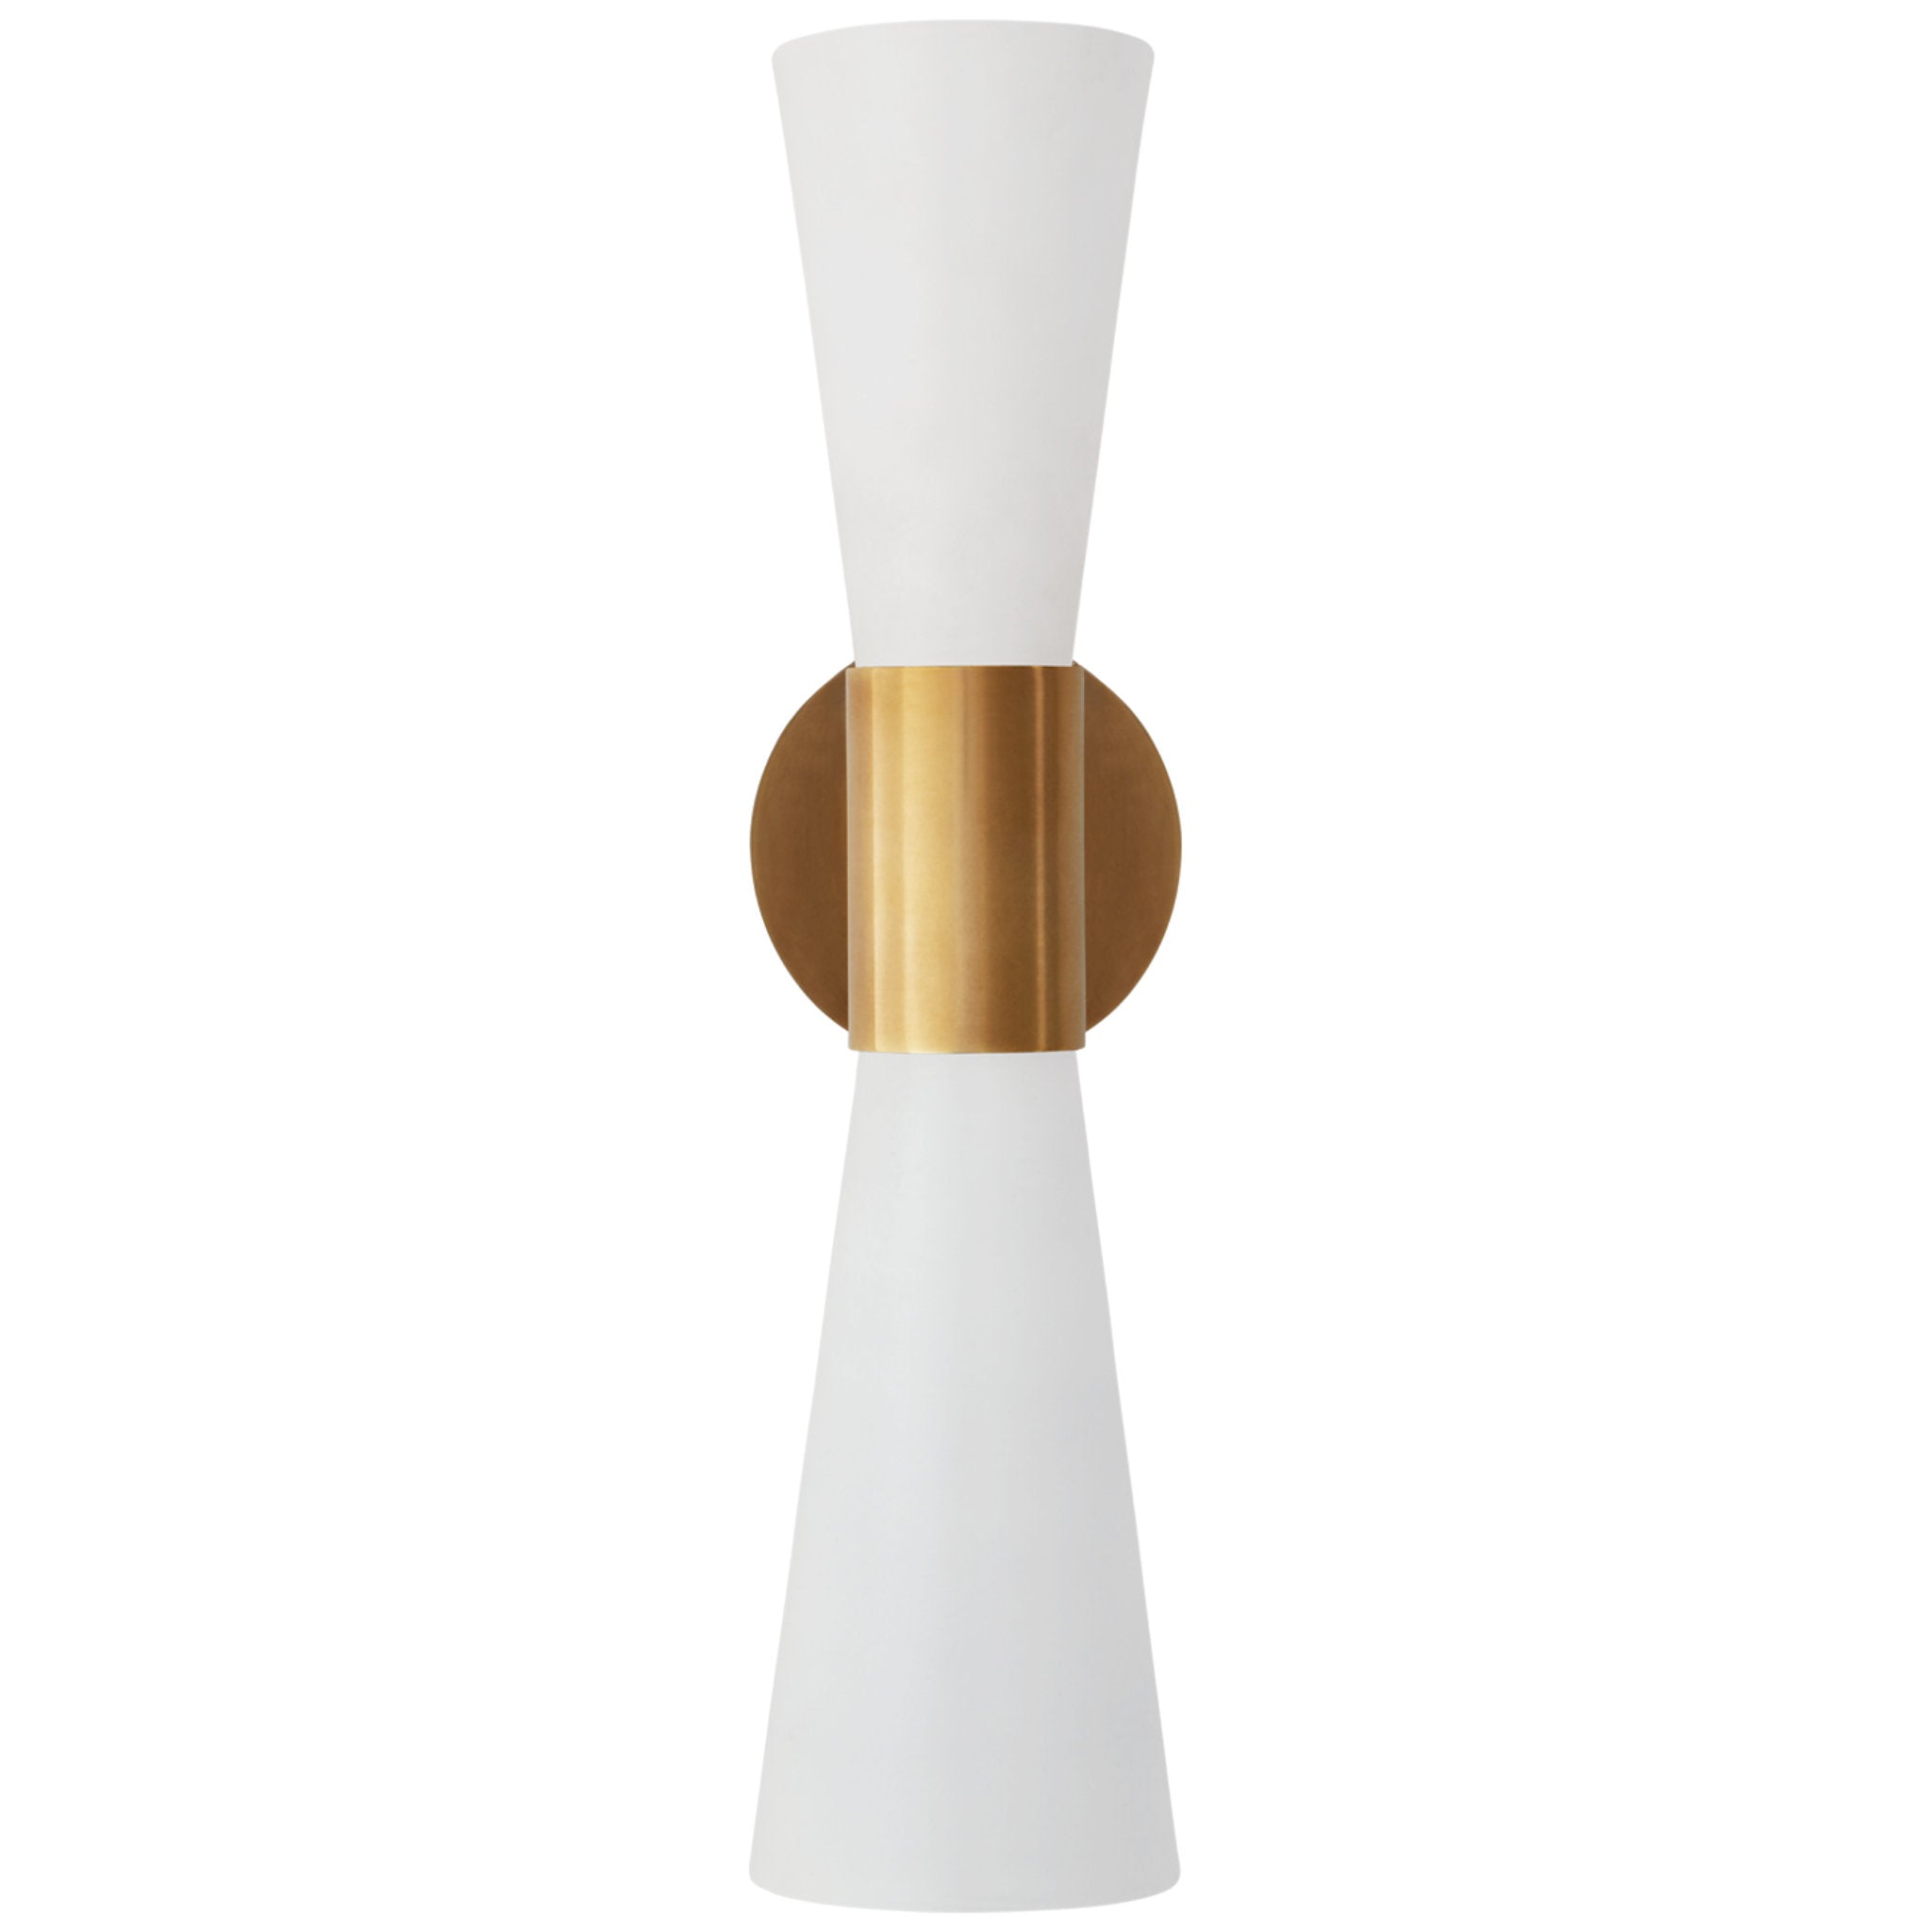 AERIN Clarkson Medium Narrow Sconce in Hand-Rubbed Antique Brass and White